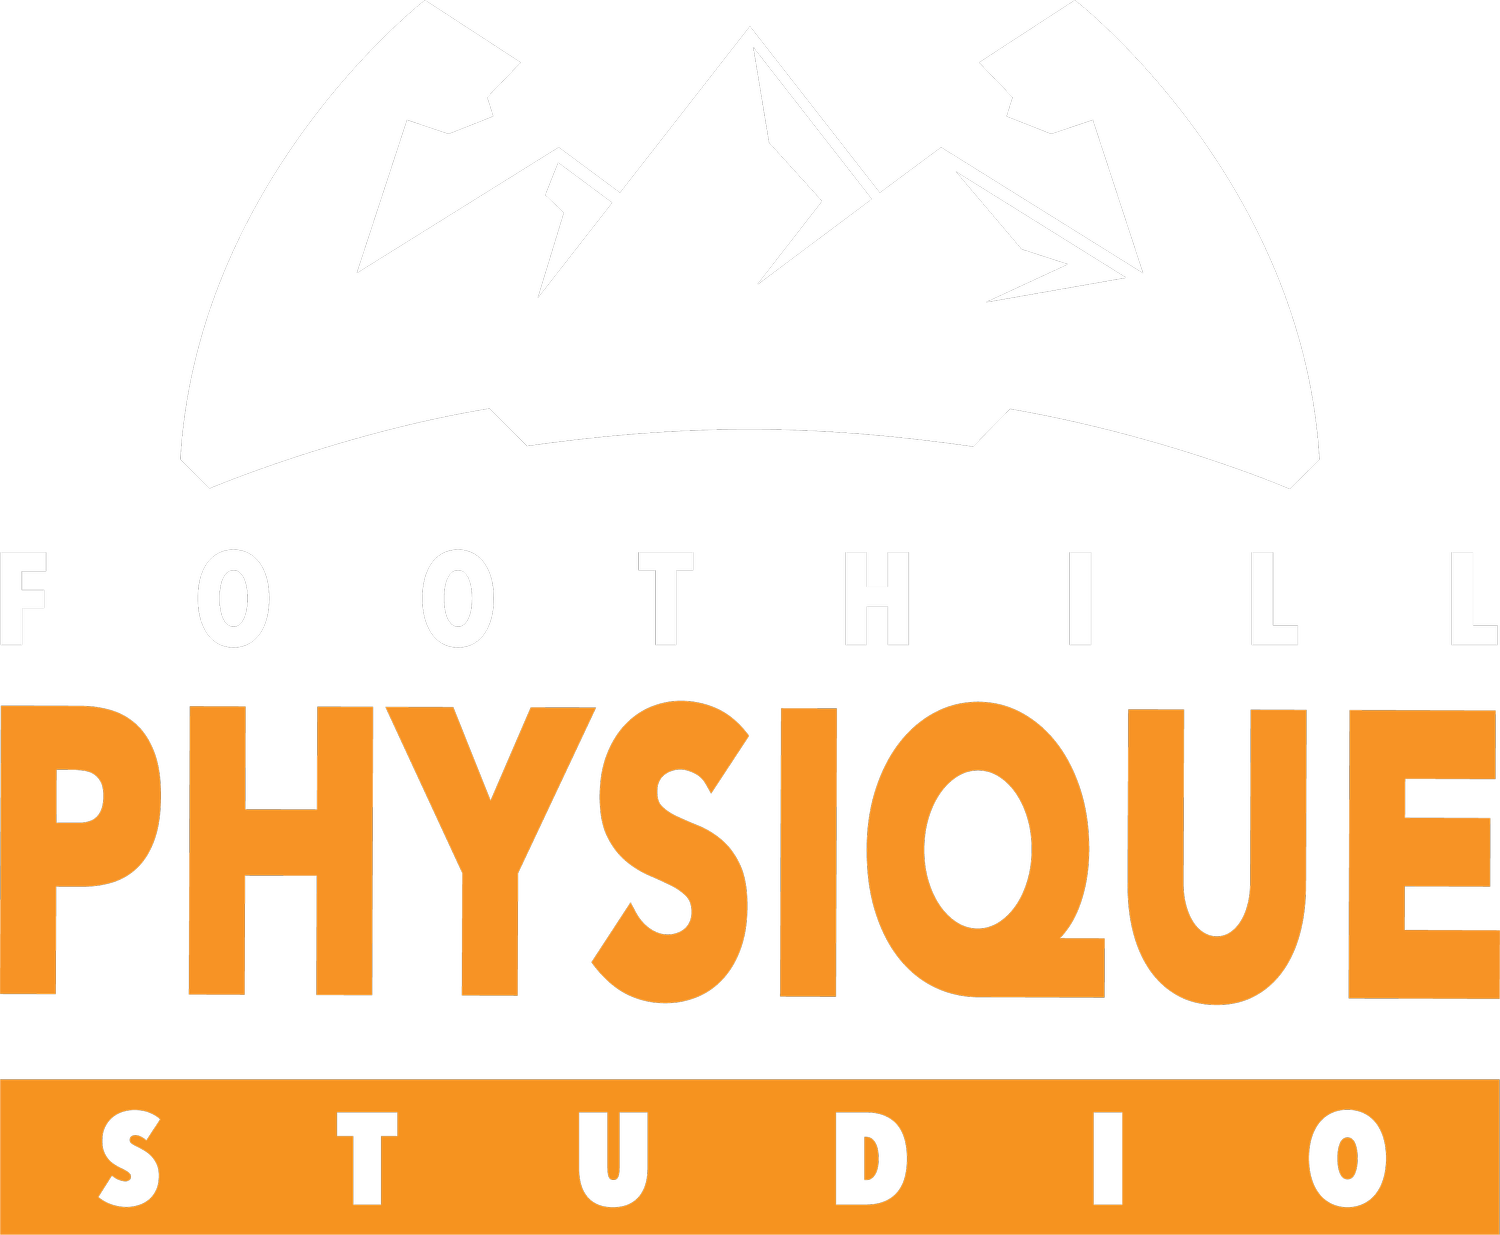 Foothill Physique Studio